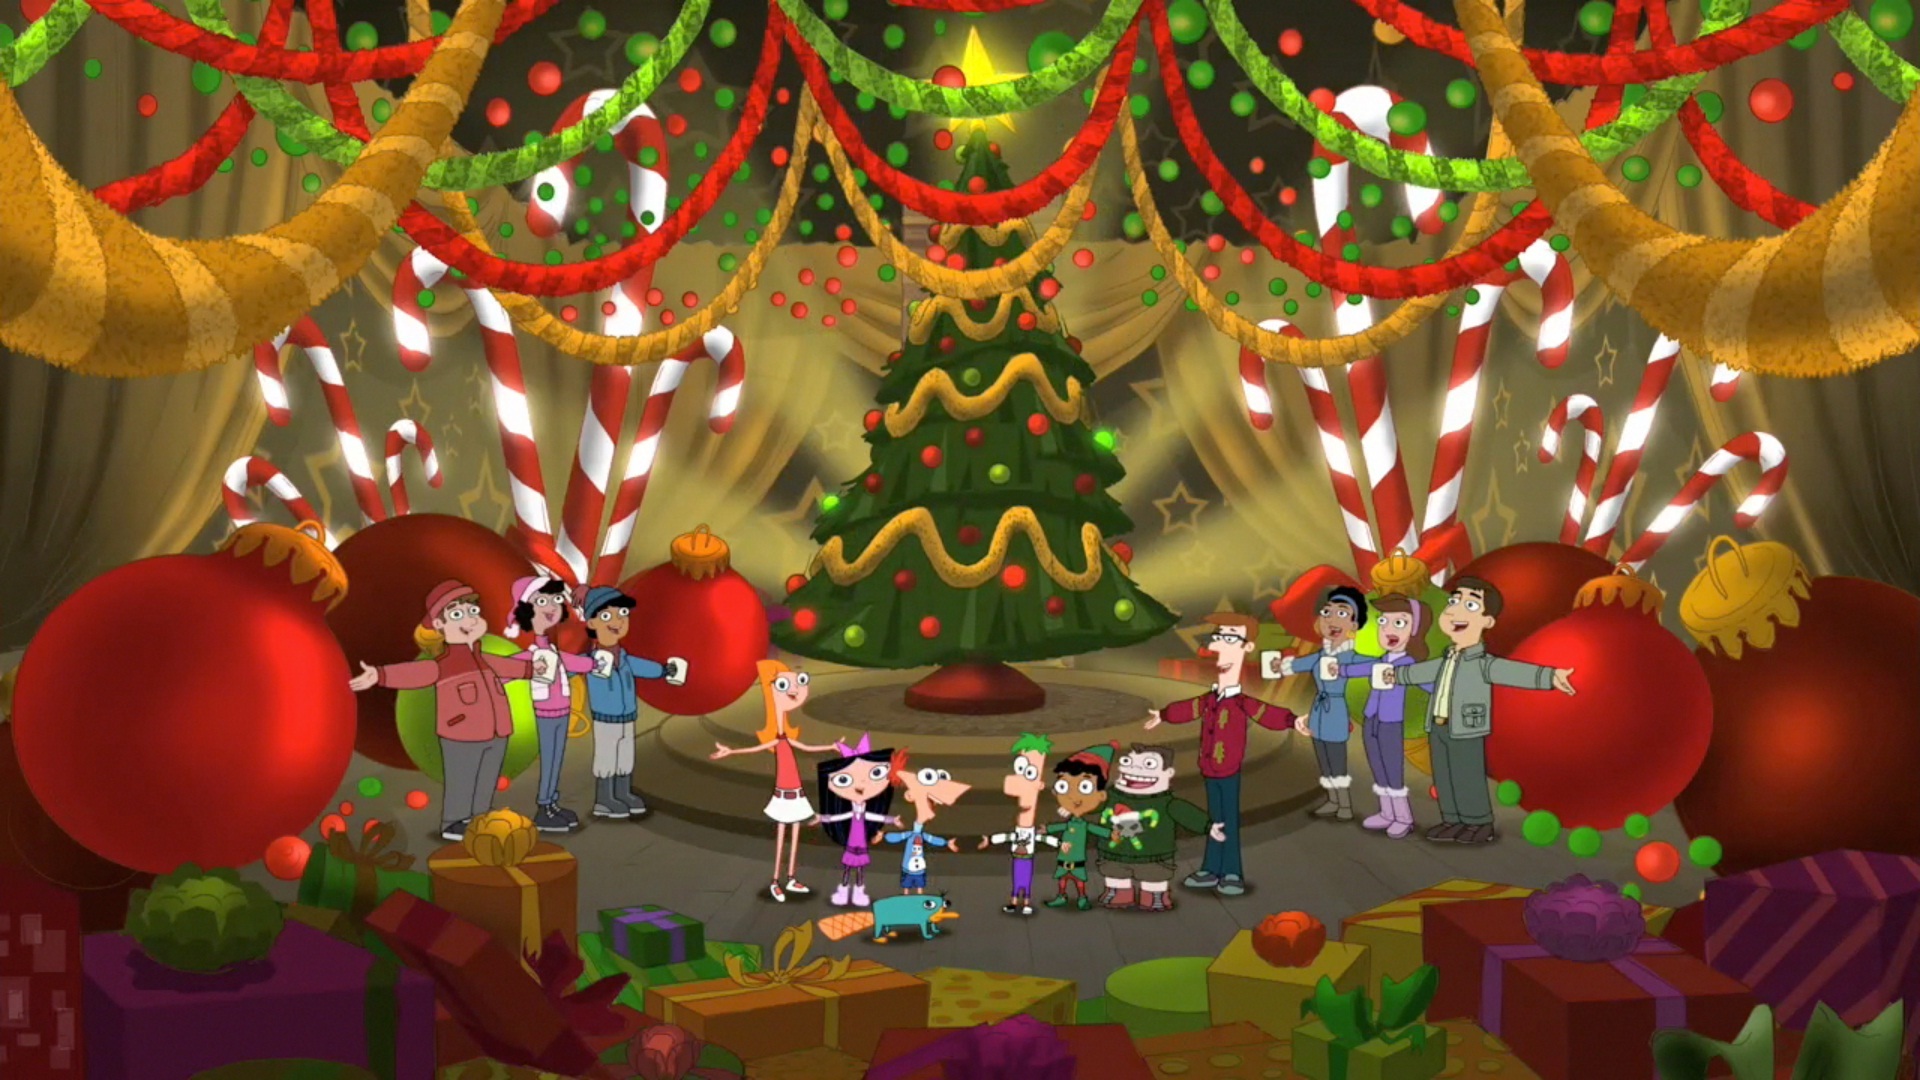 A Phineas and Ferb Family Christmas - Phineas and Ferb Wiki - Your.